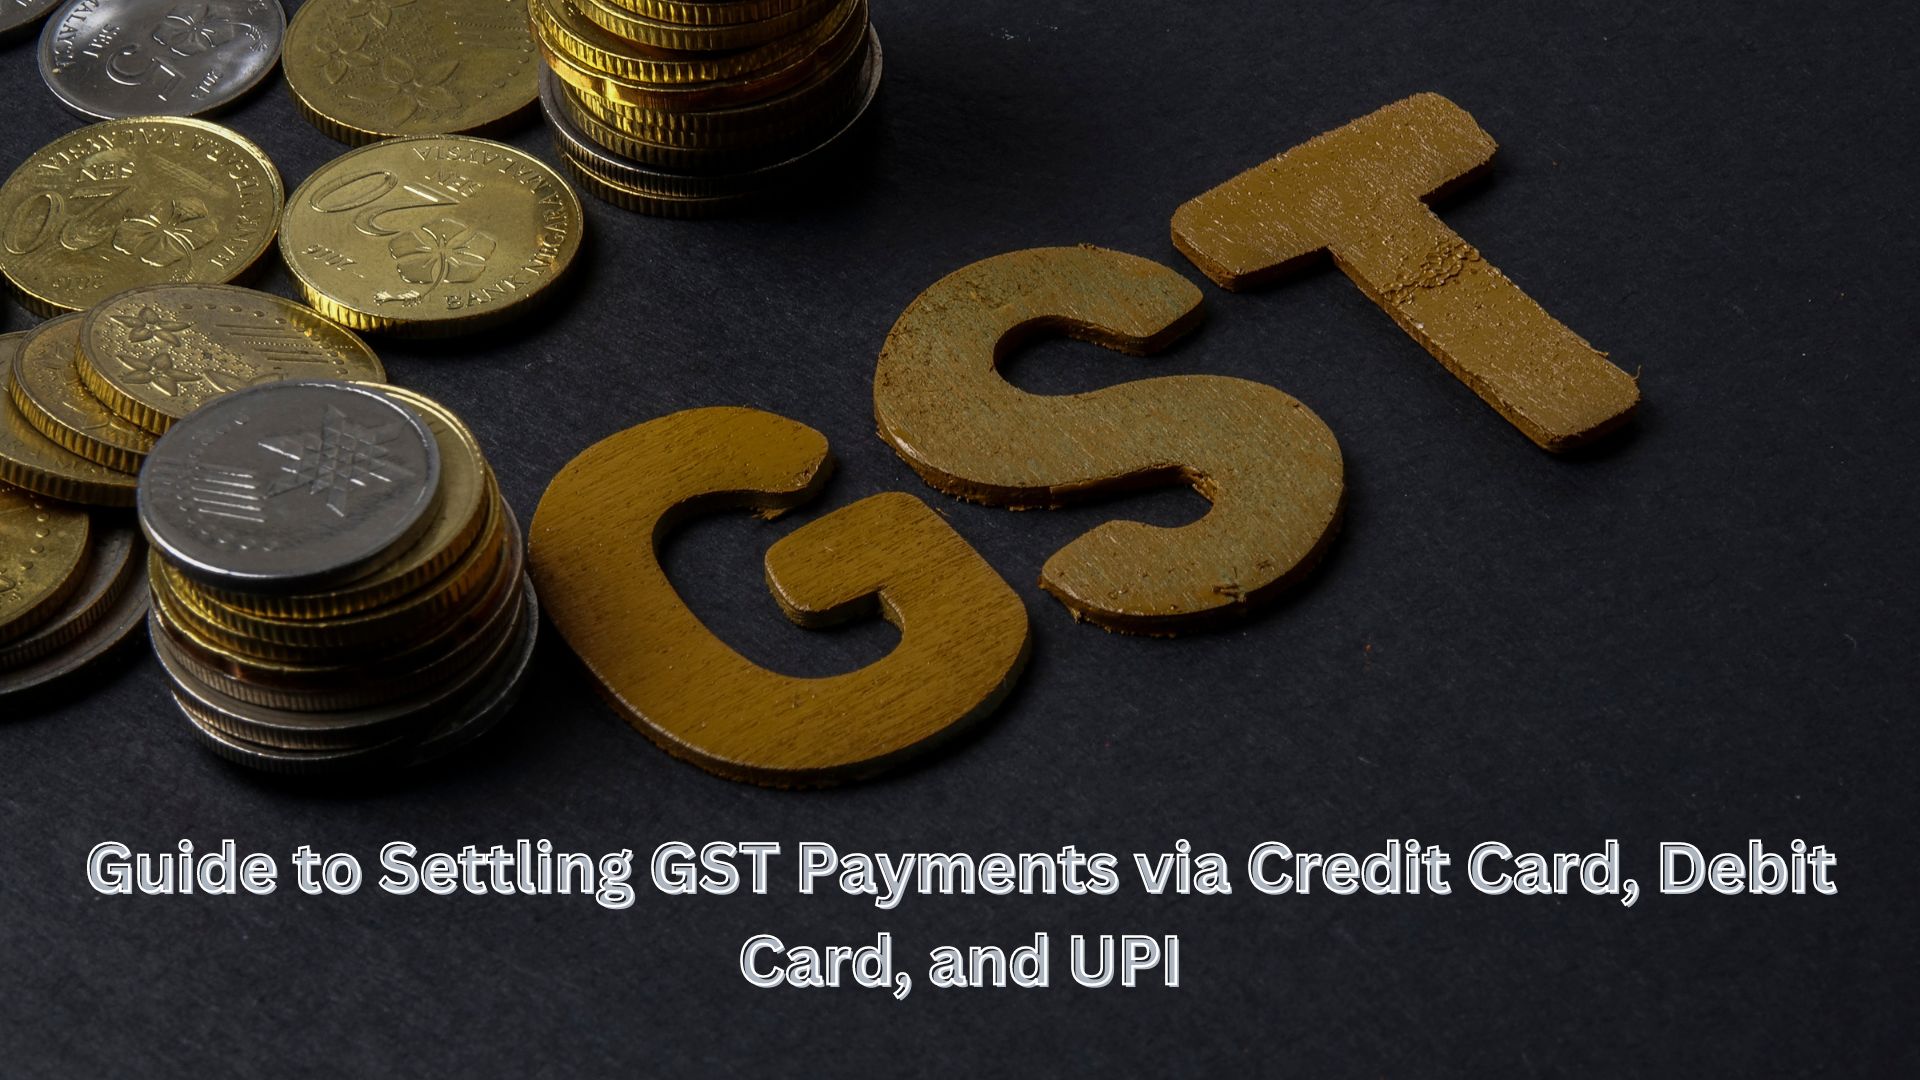 Guide to Settling GST Payments via Credit Card, Debit Card, and UPI